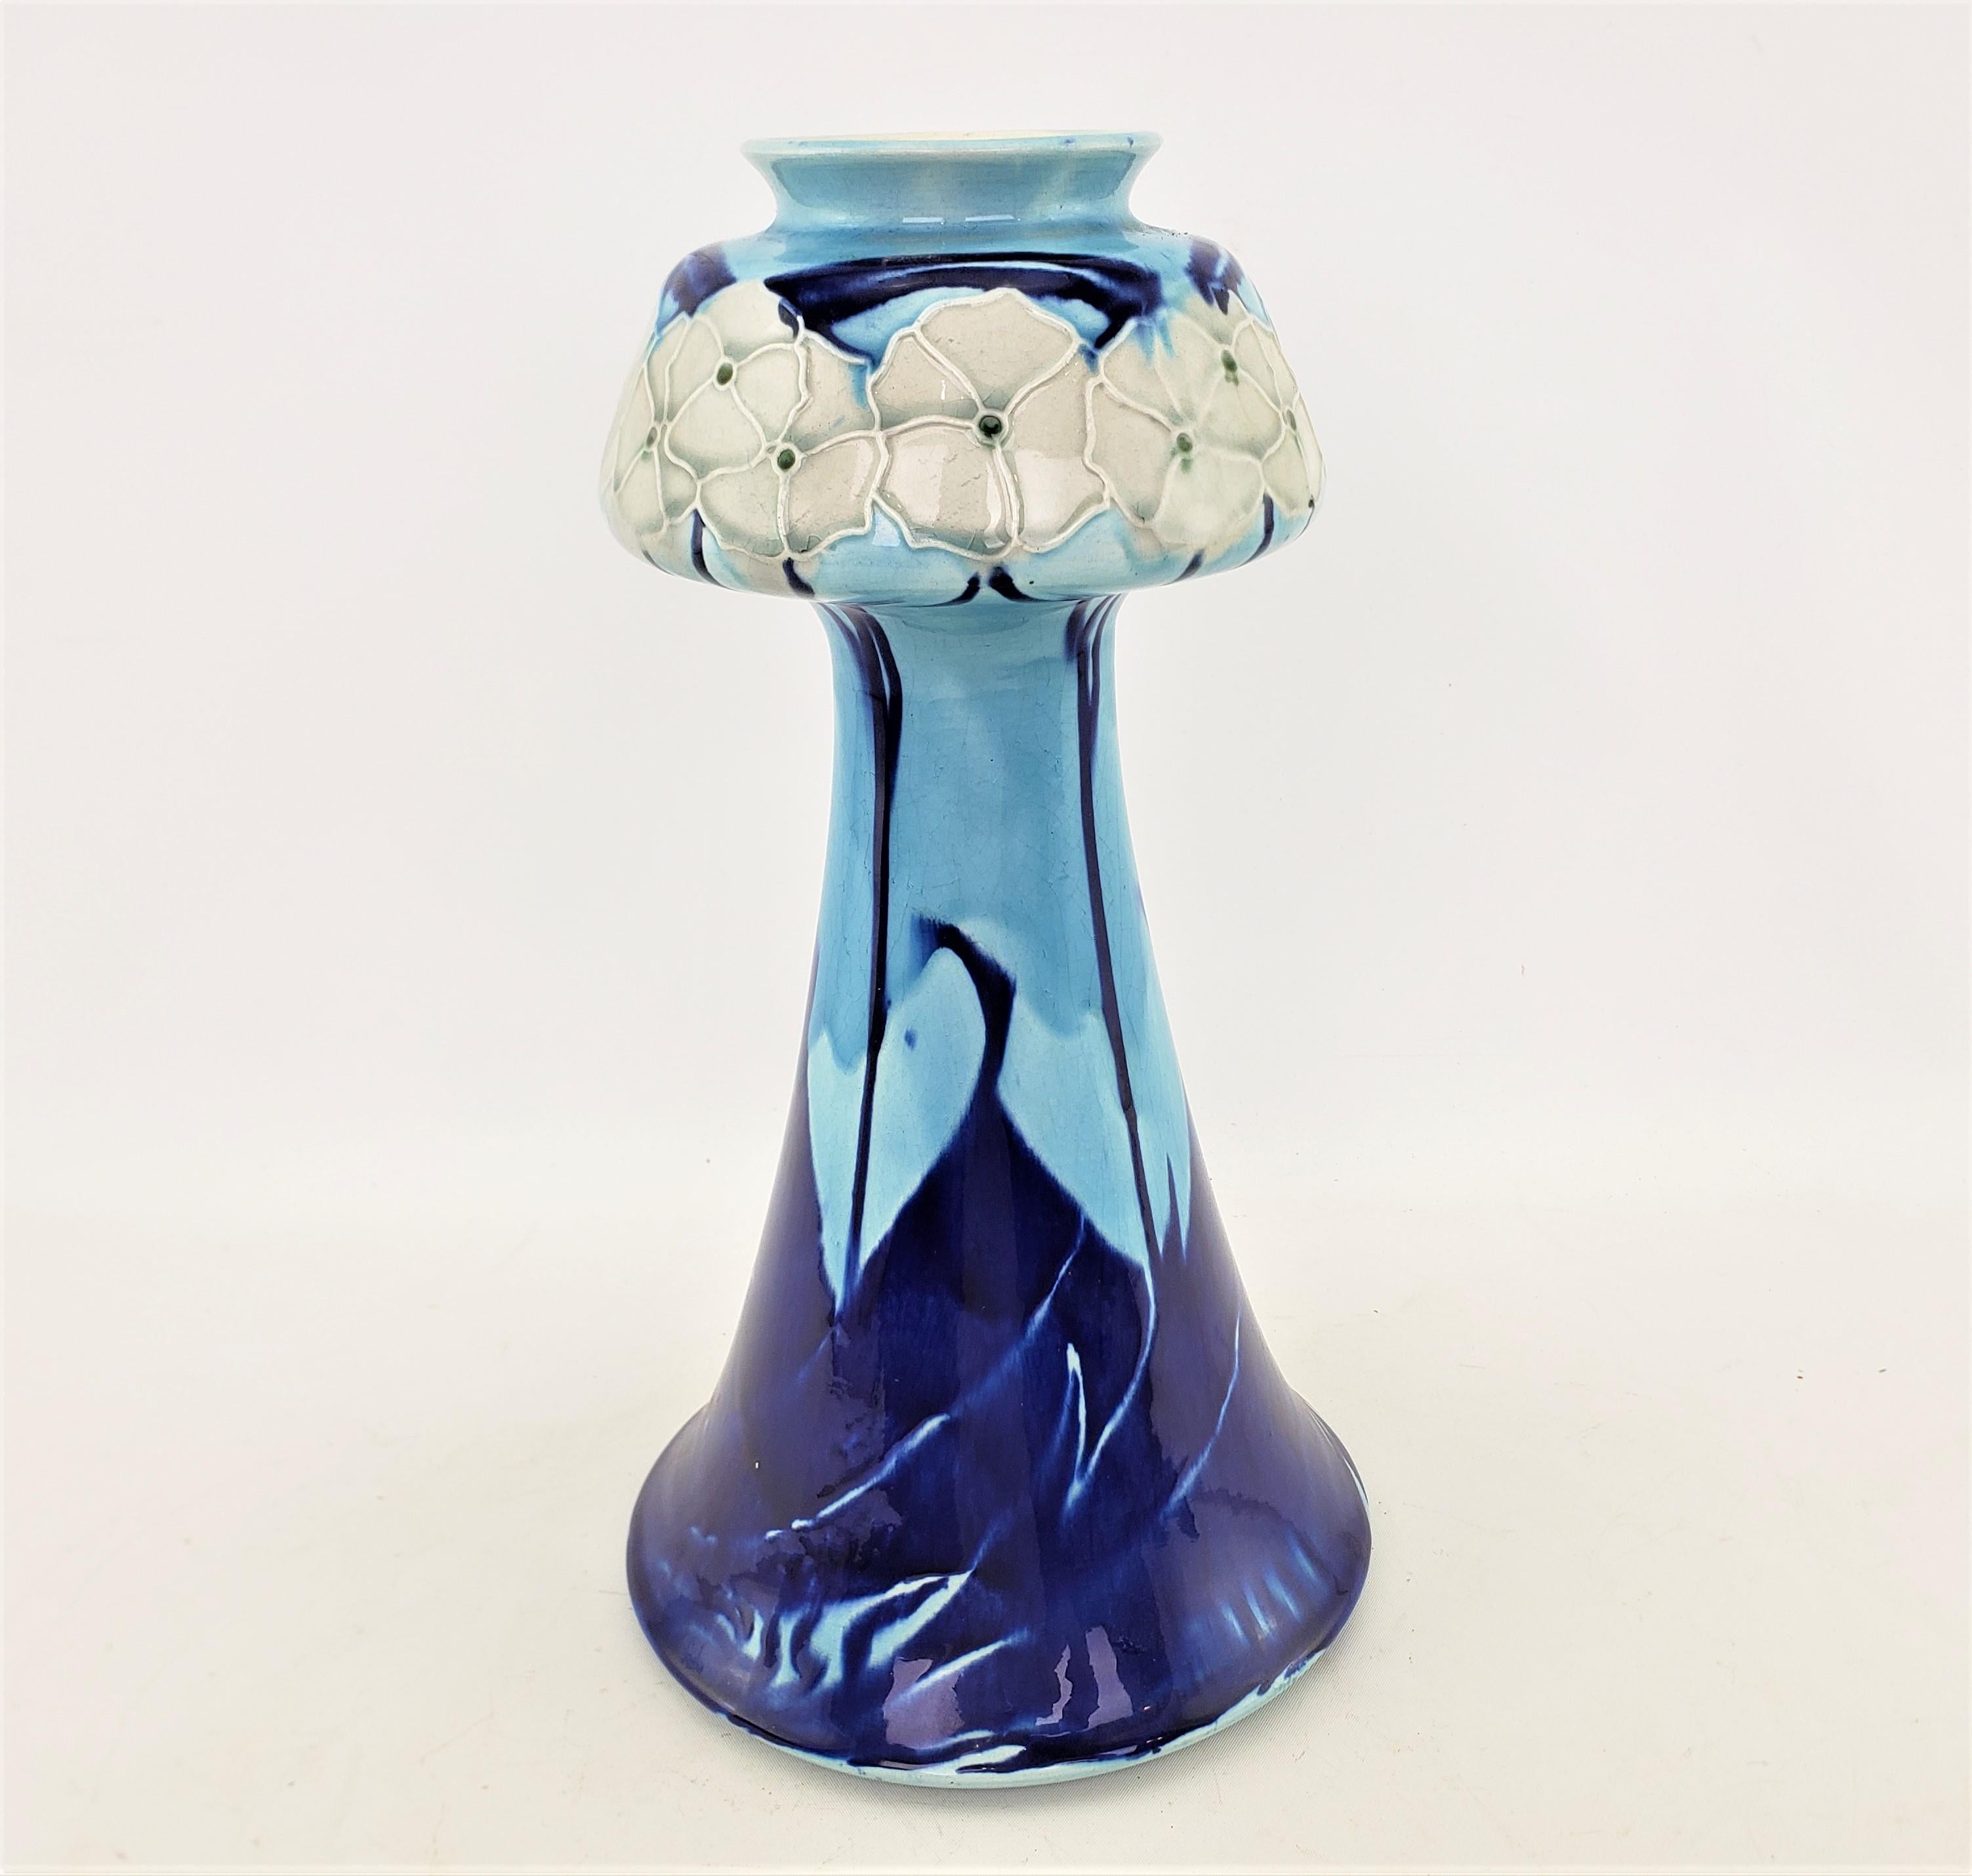 Antique Minton Secessionist Vase in Light Blue and Cobalt with Floral Motif In Good Condition For Sale In Hamilton, Ontario